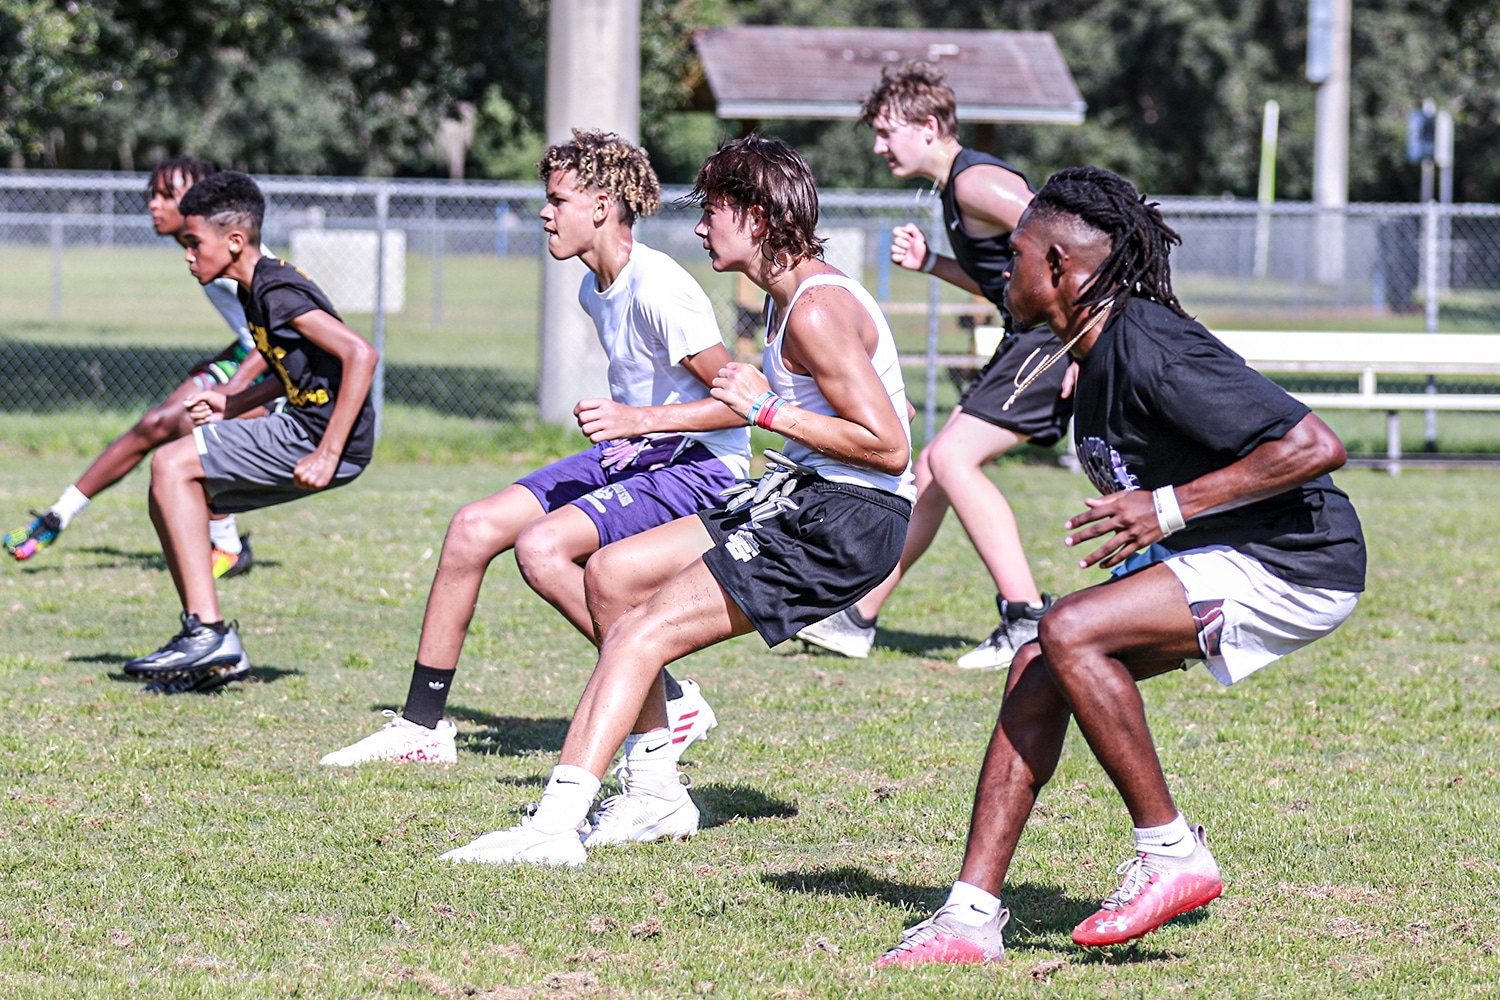 A new semi-pro football team giving back to the youth with a free camp image